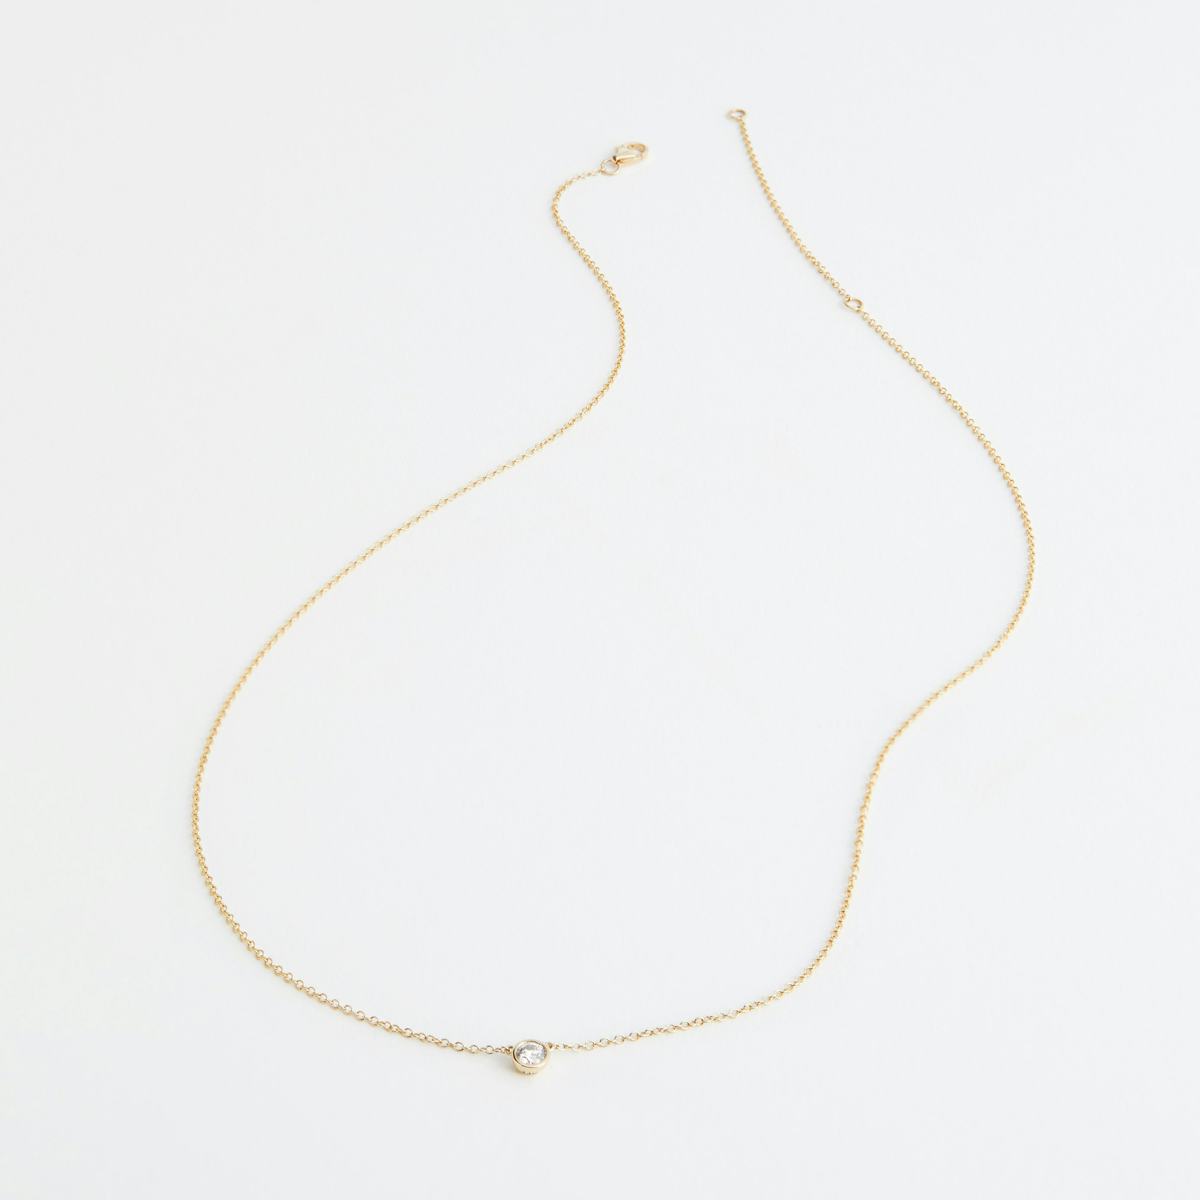 YellowGold_DiamondSolitaire_Necklace_1x1_FRONT_0111.jpg